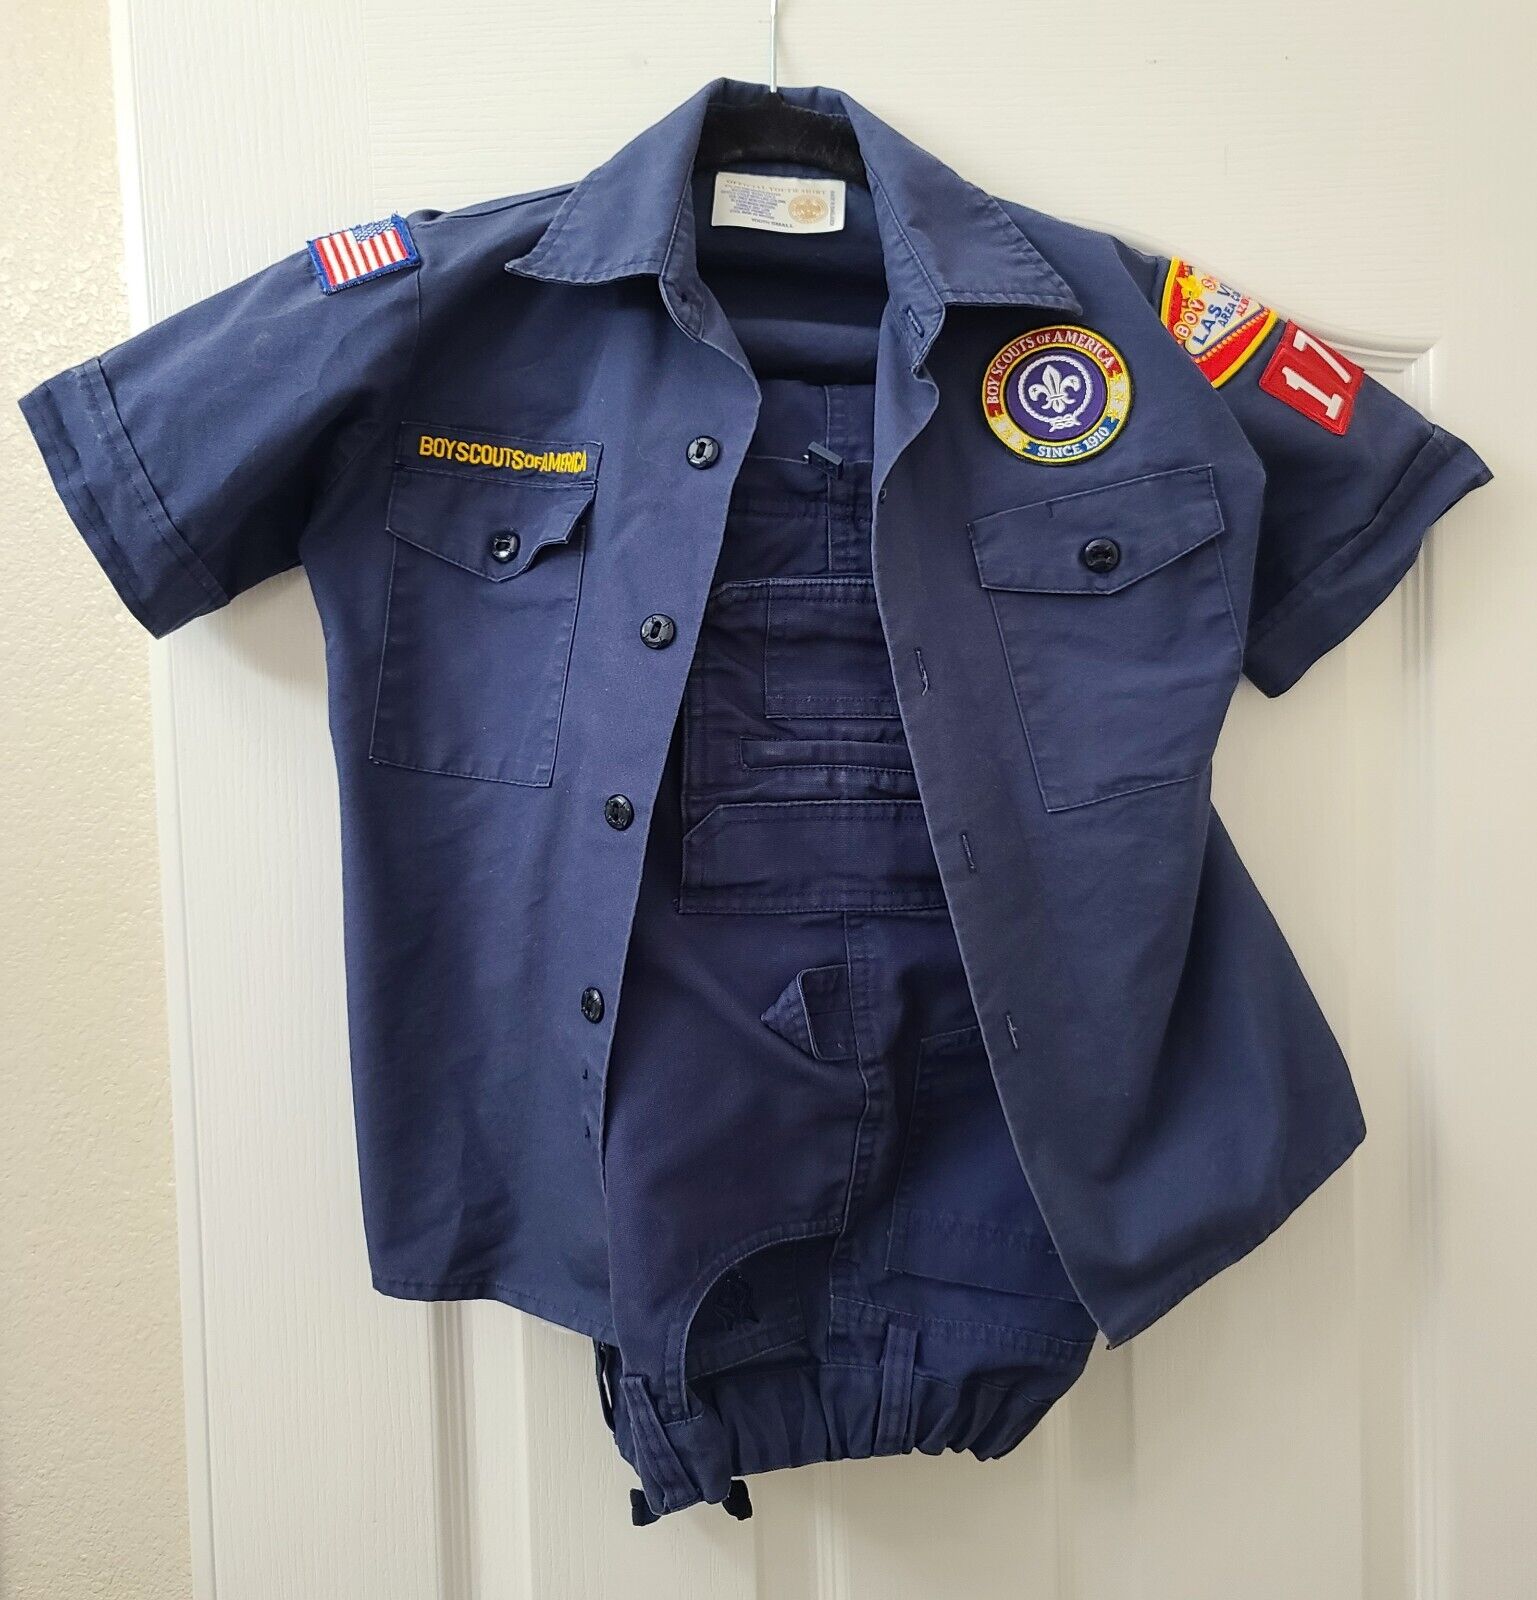 Boy Scouts Uniform Blue Boys Youth  Shirt Small And Pant/Short Size 6